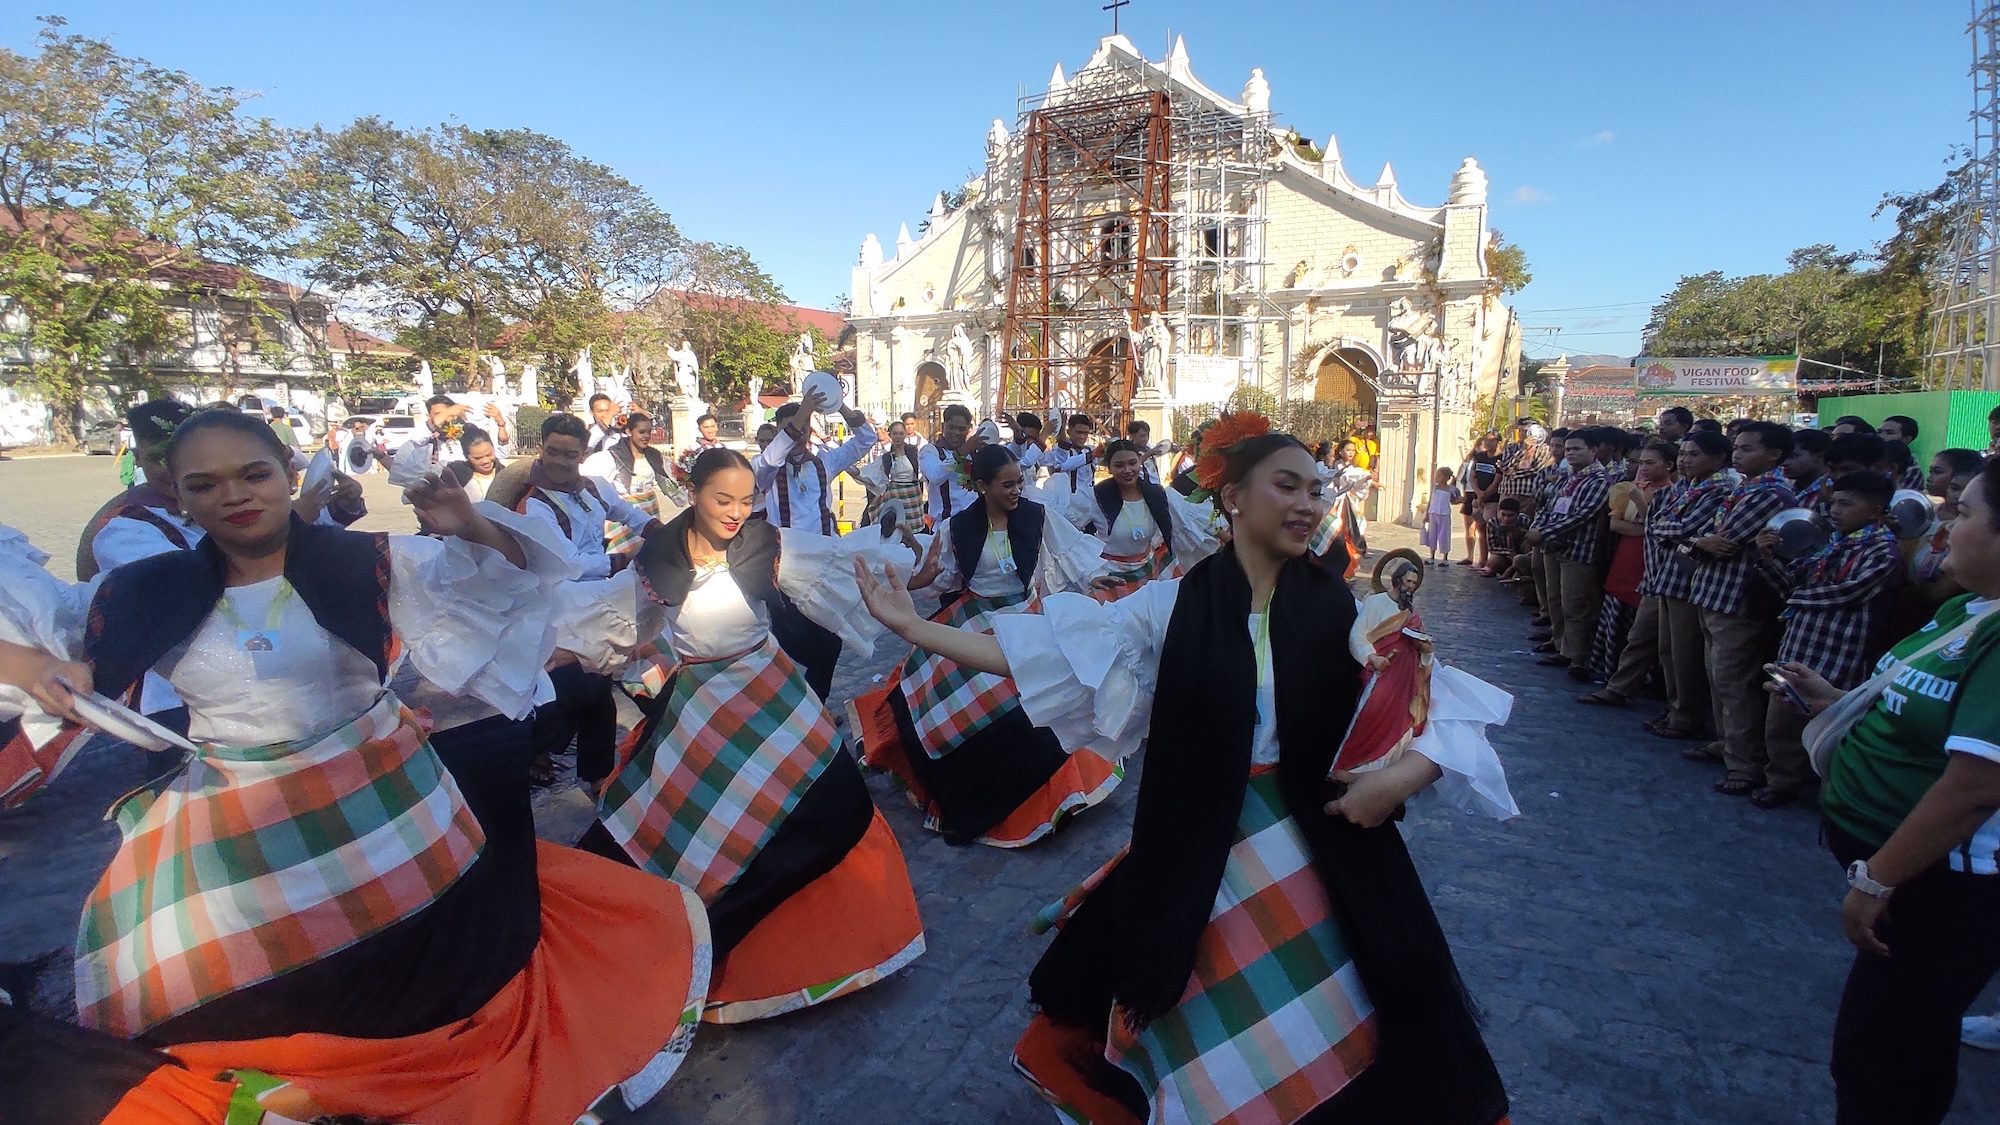 LOOK: Earthquake-damaged Vigan Cathedral on its way to rehabilitation